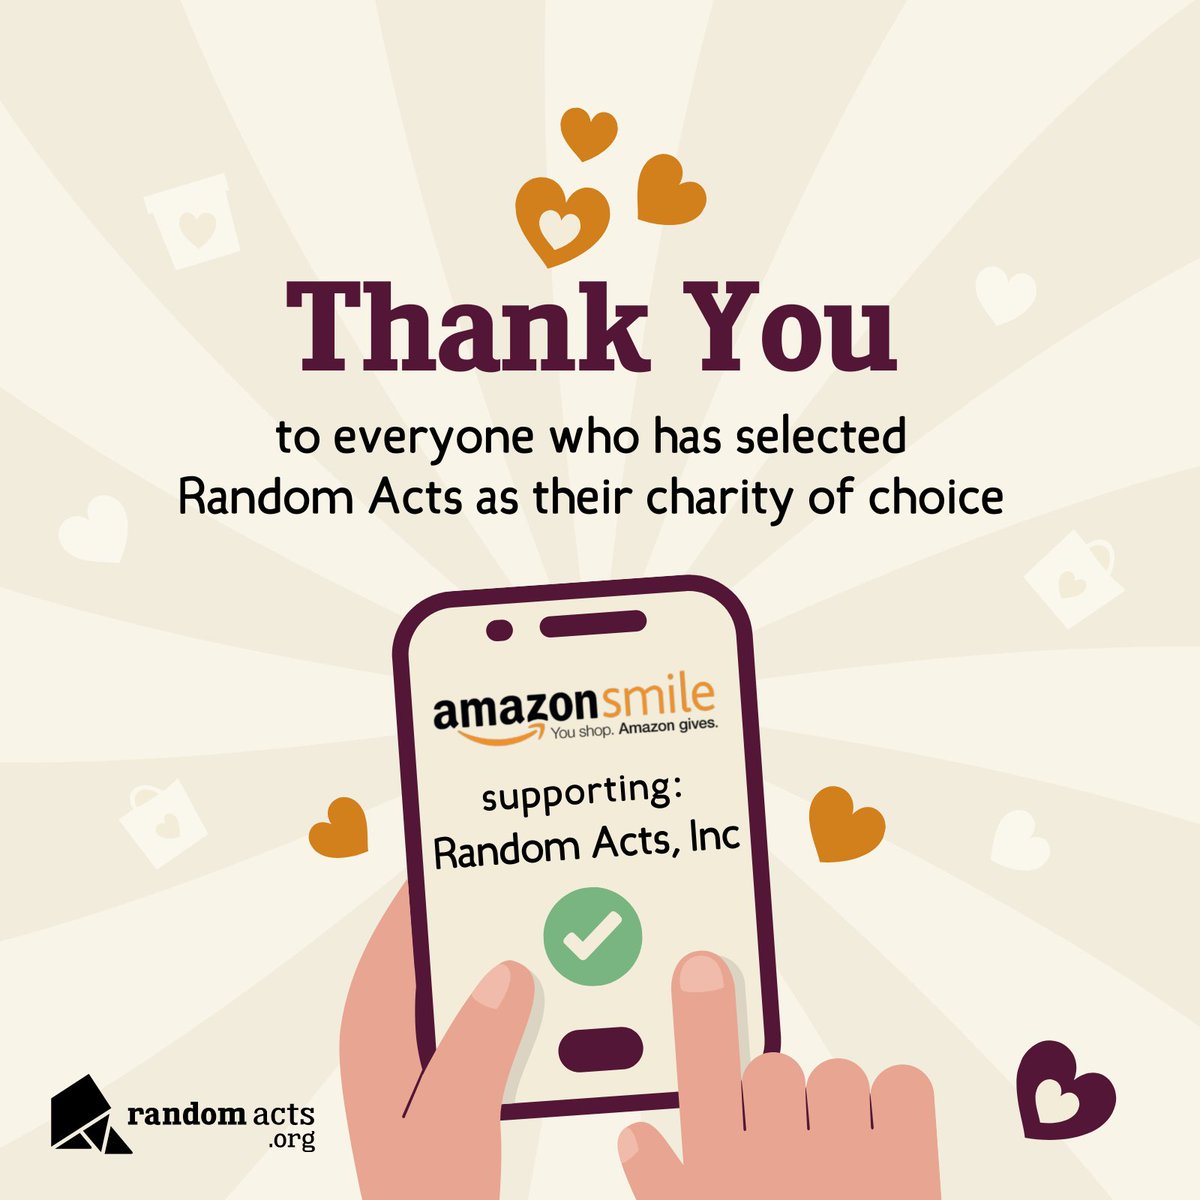 A huge thank you to all who selected Random Acts as their charity for AmazonSmile! We recently received $1,179.14 from one of their last donations to us. Although their program came to an end, your ongoing support fuels our mission to spread kindness far and wide!